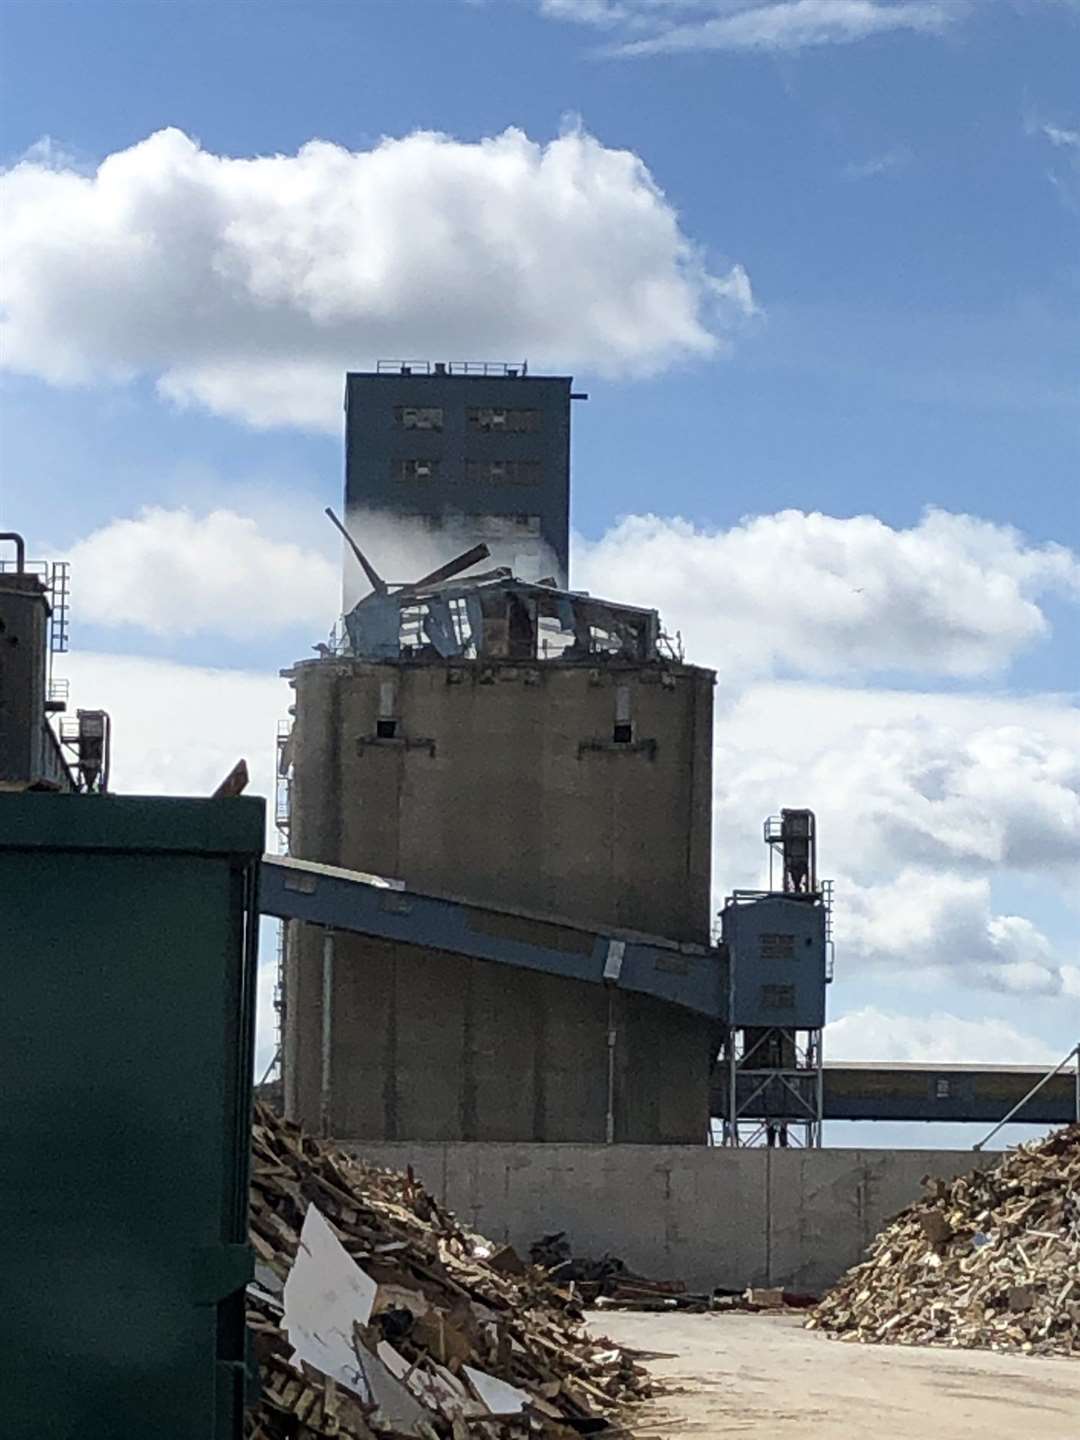 Concrete silos were damaged in the incident. Picture: @TonyRAgg